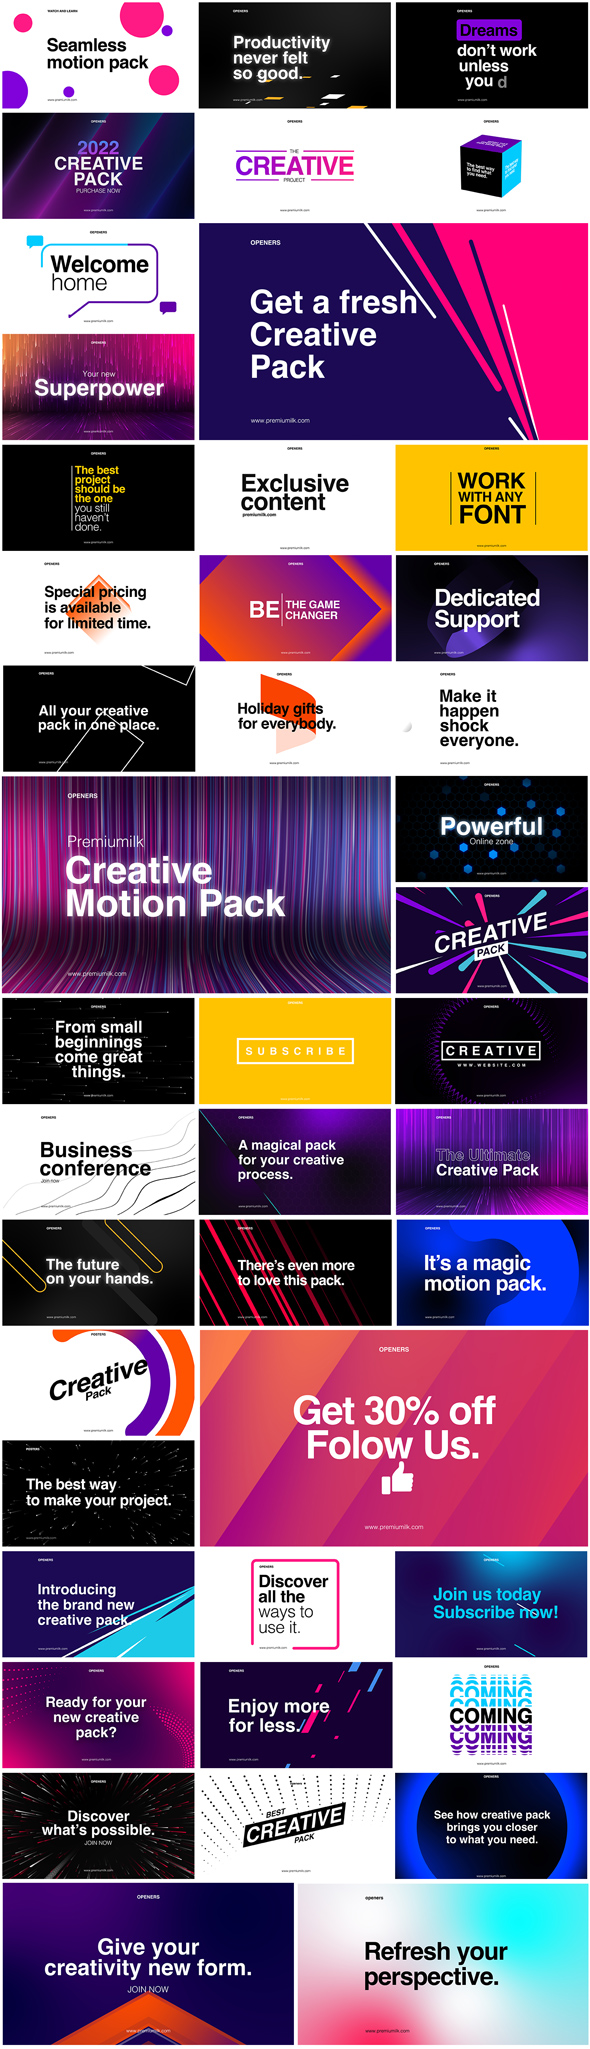 Creative Motion Pack - 12